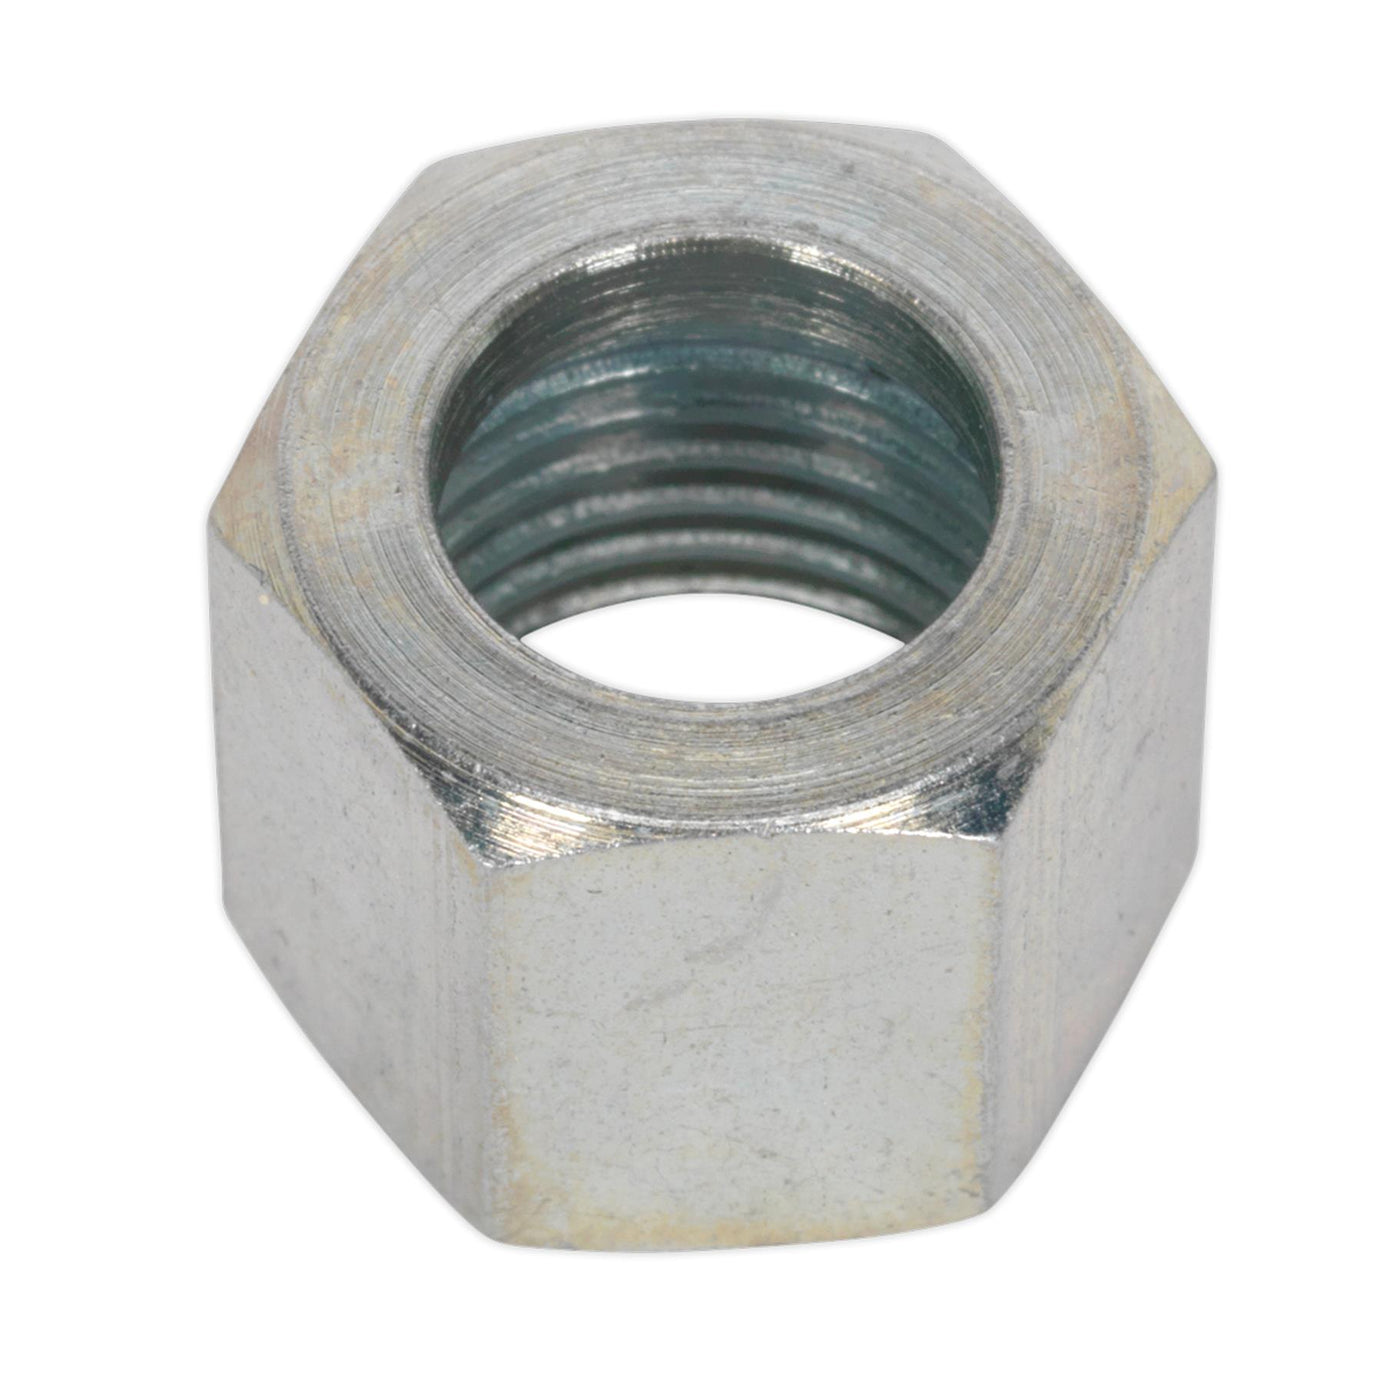 Sealey Union Nut 1/4"BSP for Workshop/Engineering  Pack of 5